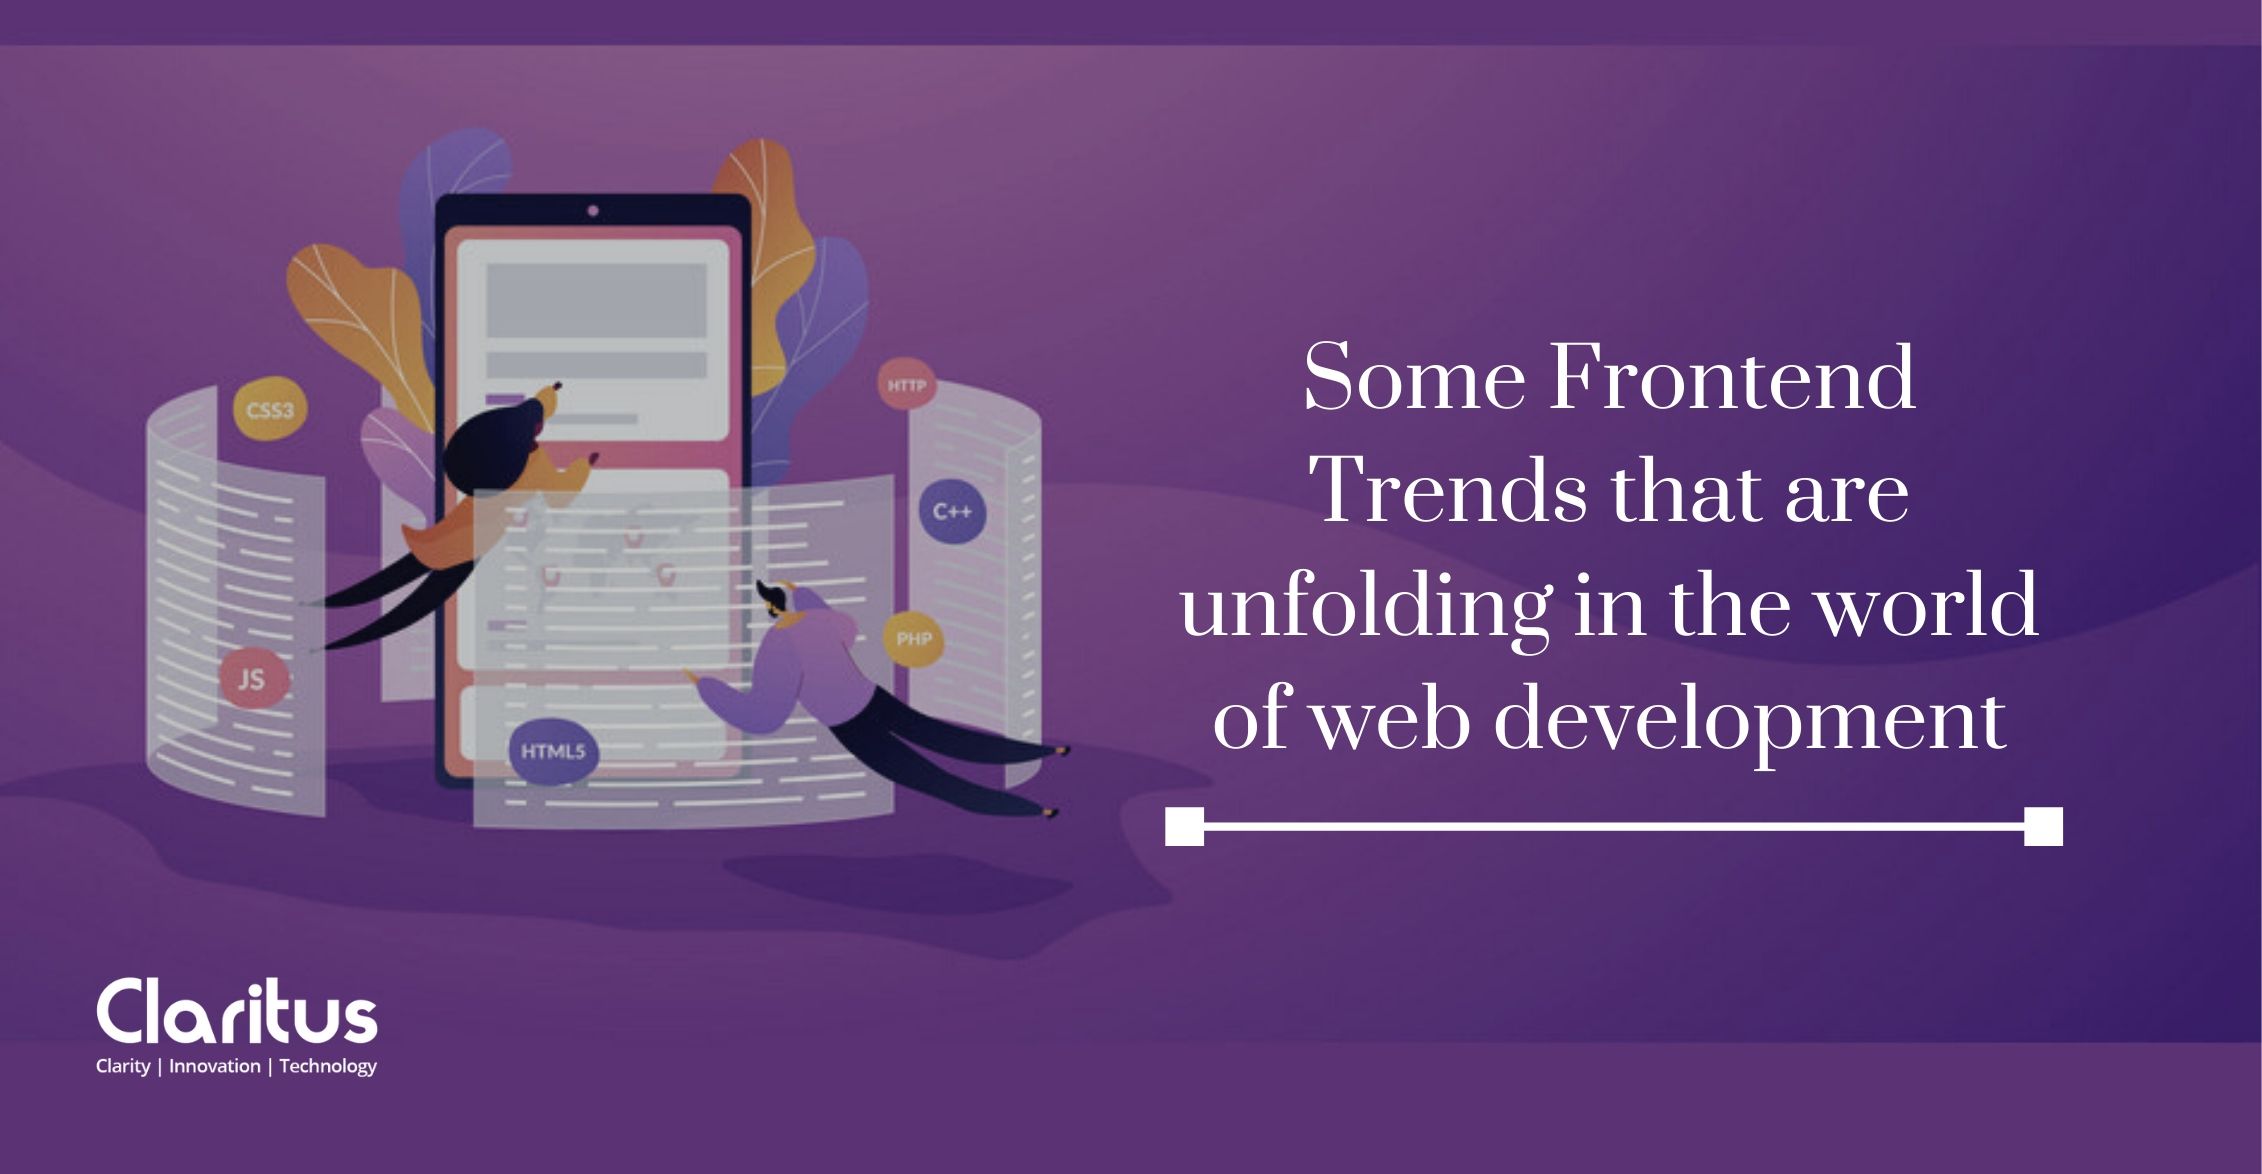 Some frontend trends that are unfolding in the world of web development